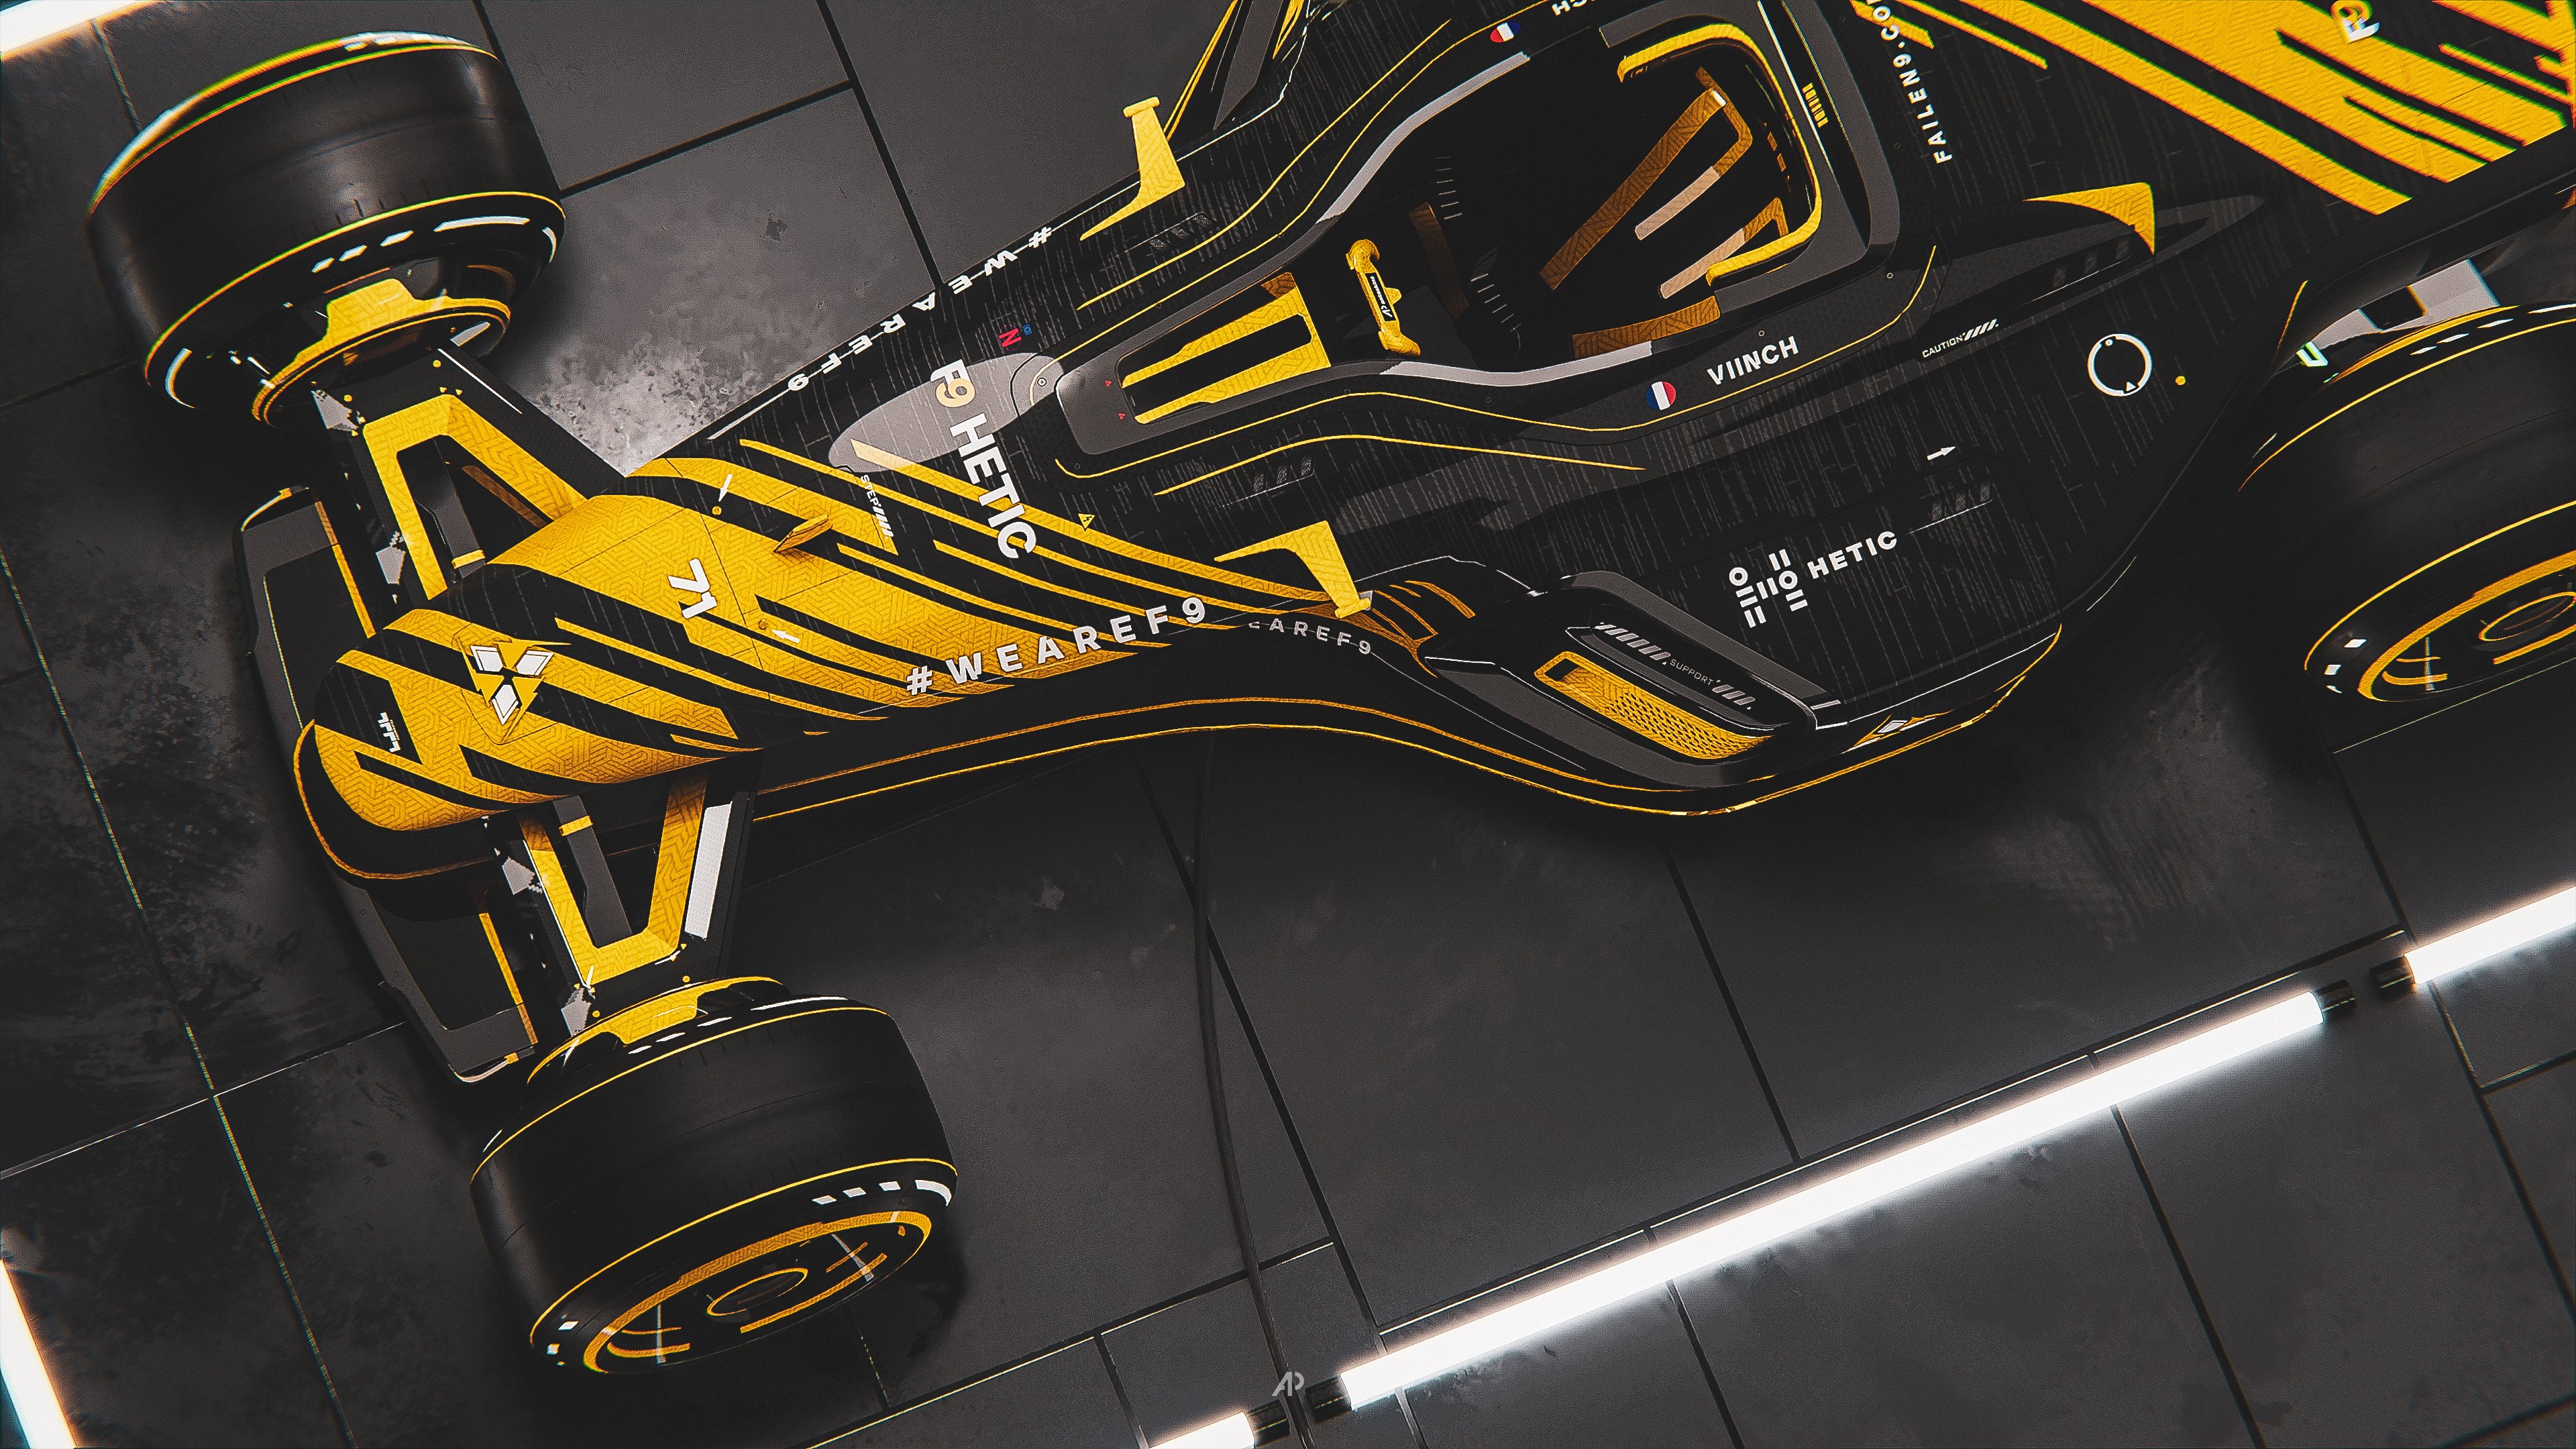 F9HETIC 2022 skin used by Hugo220 and Tricky in Semi-Finals of the ZrT Trackmania Cup 2022